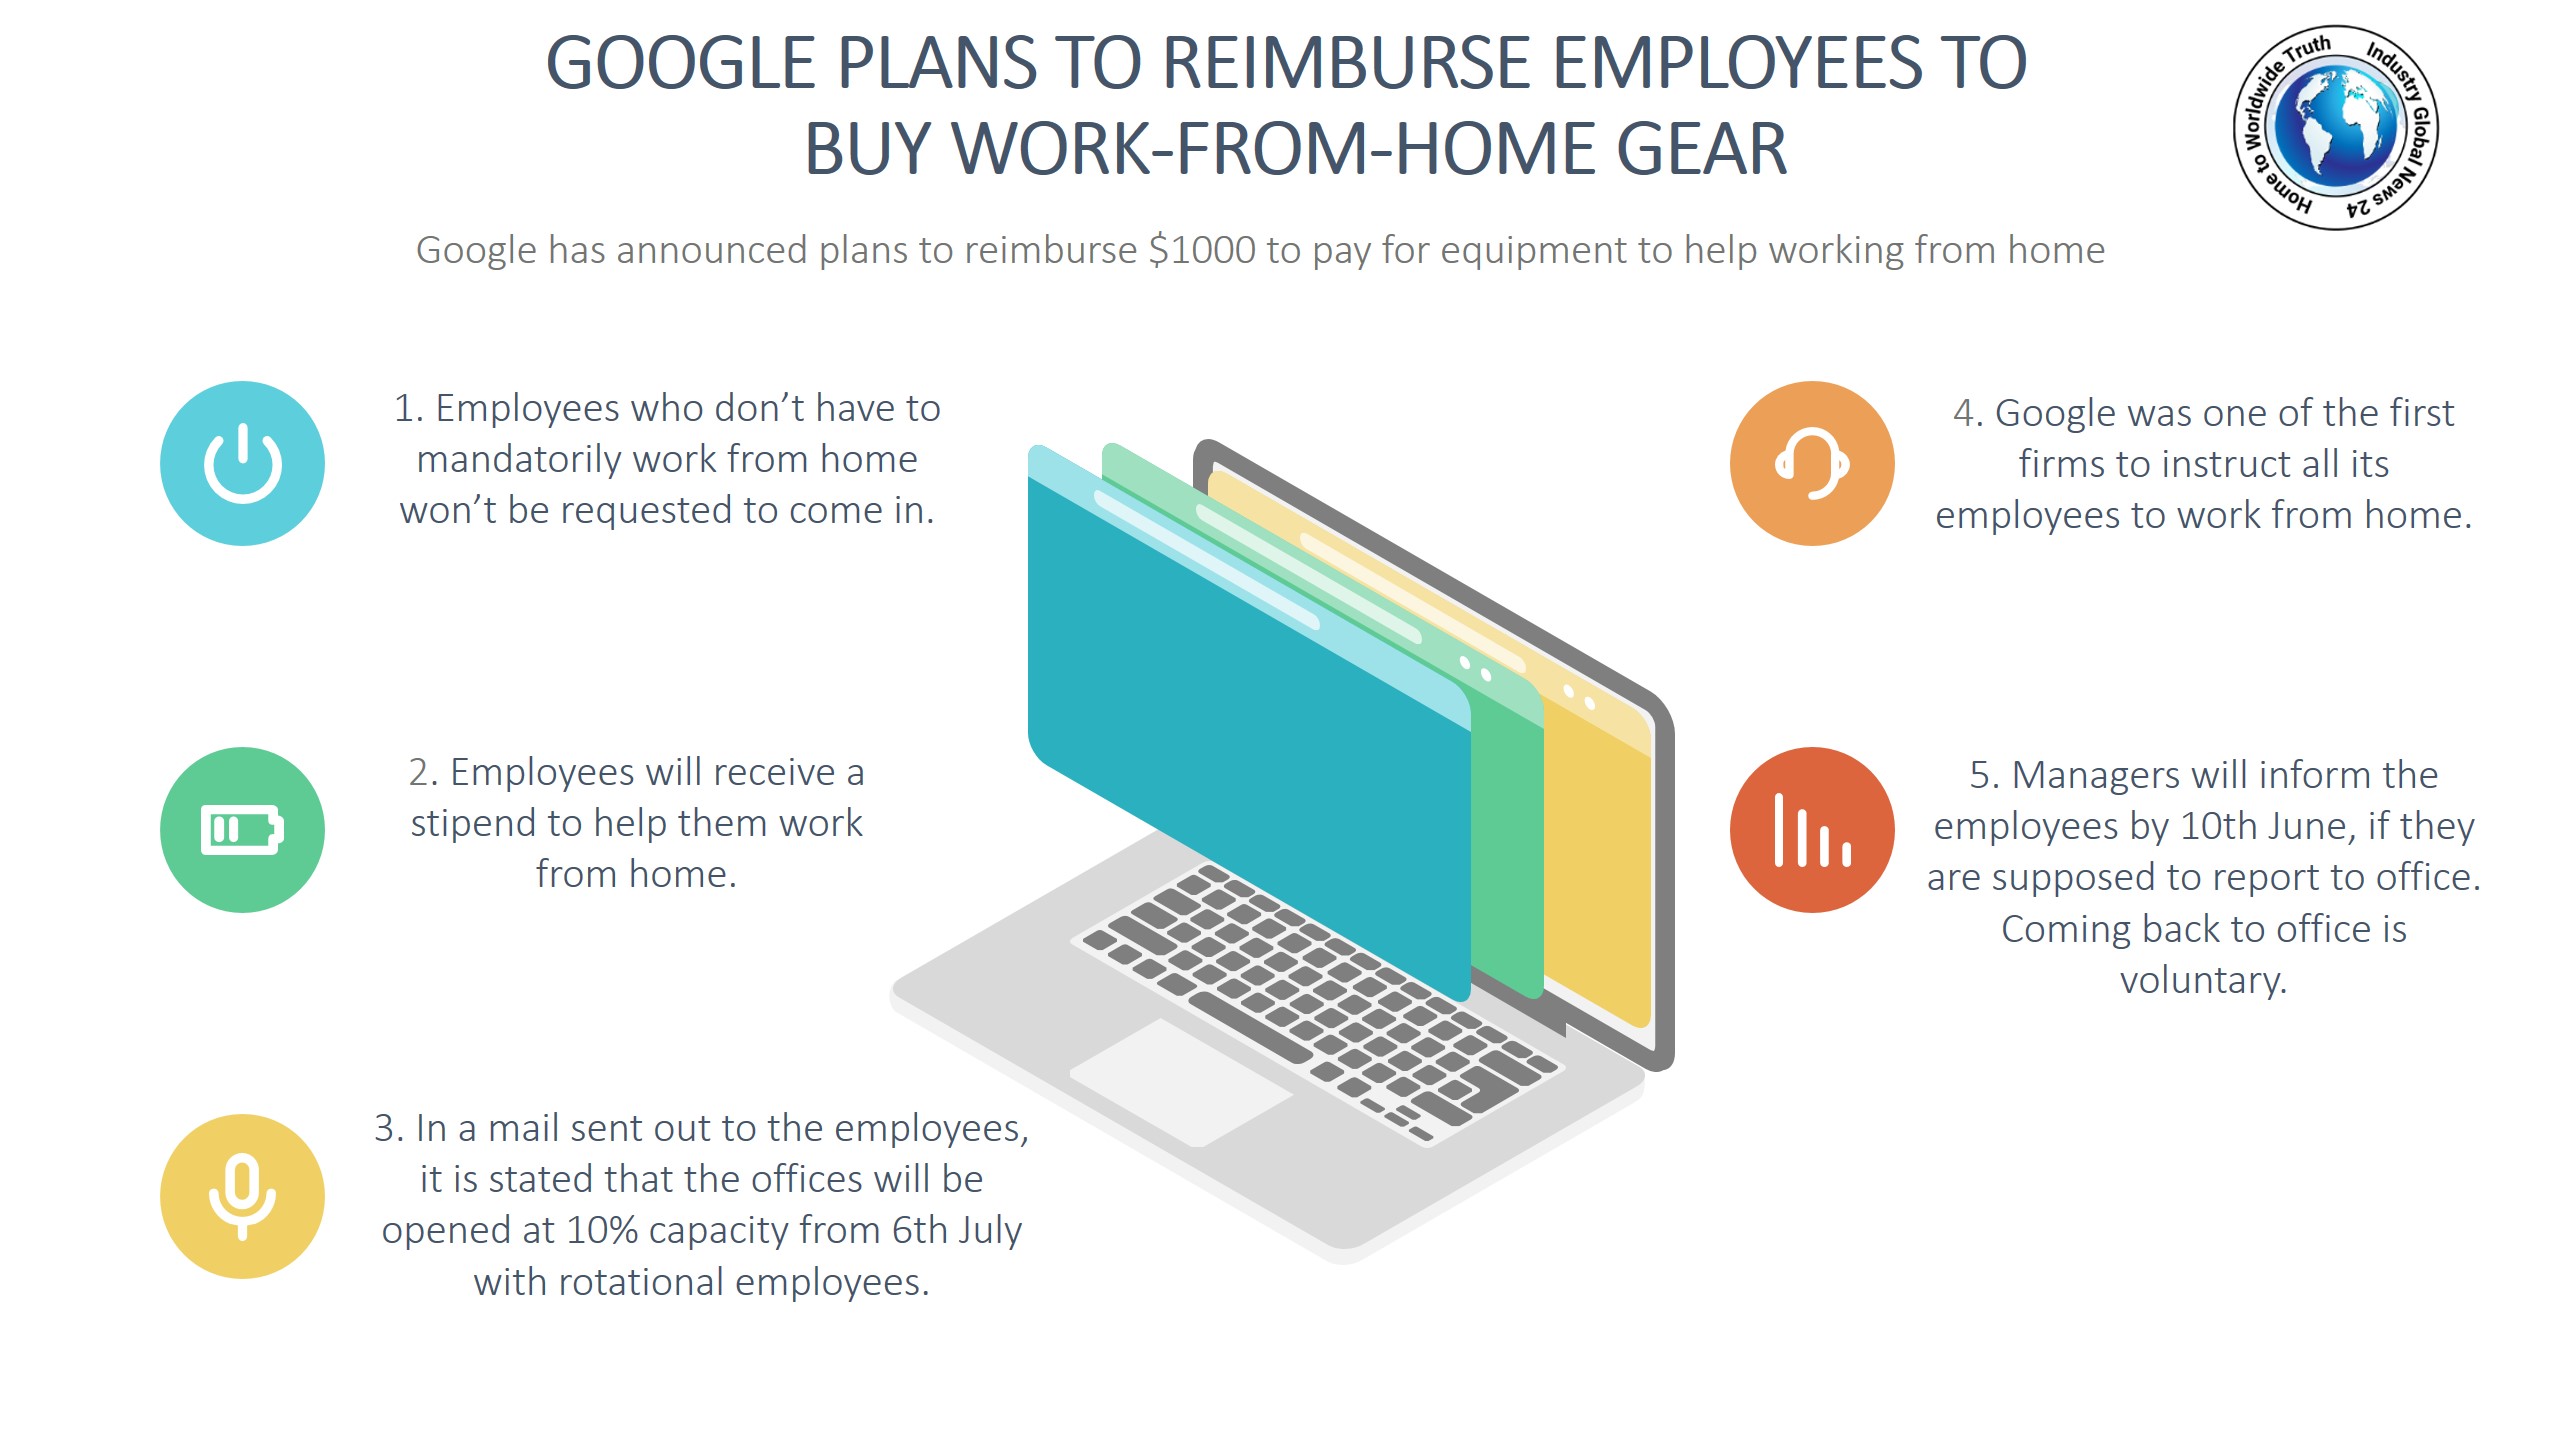 Google plans to reimburse employees to buy work-from-home gear